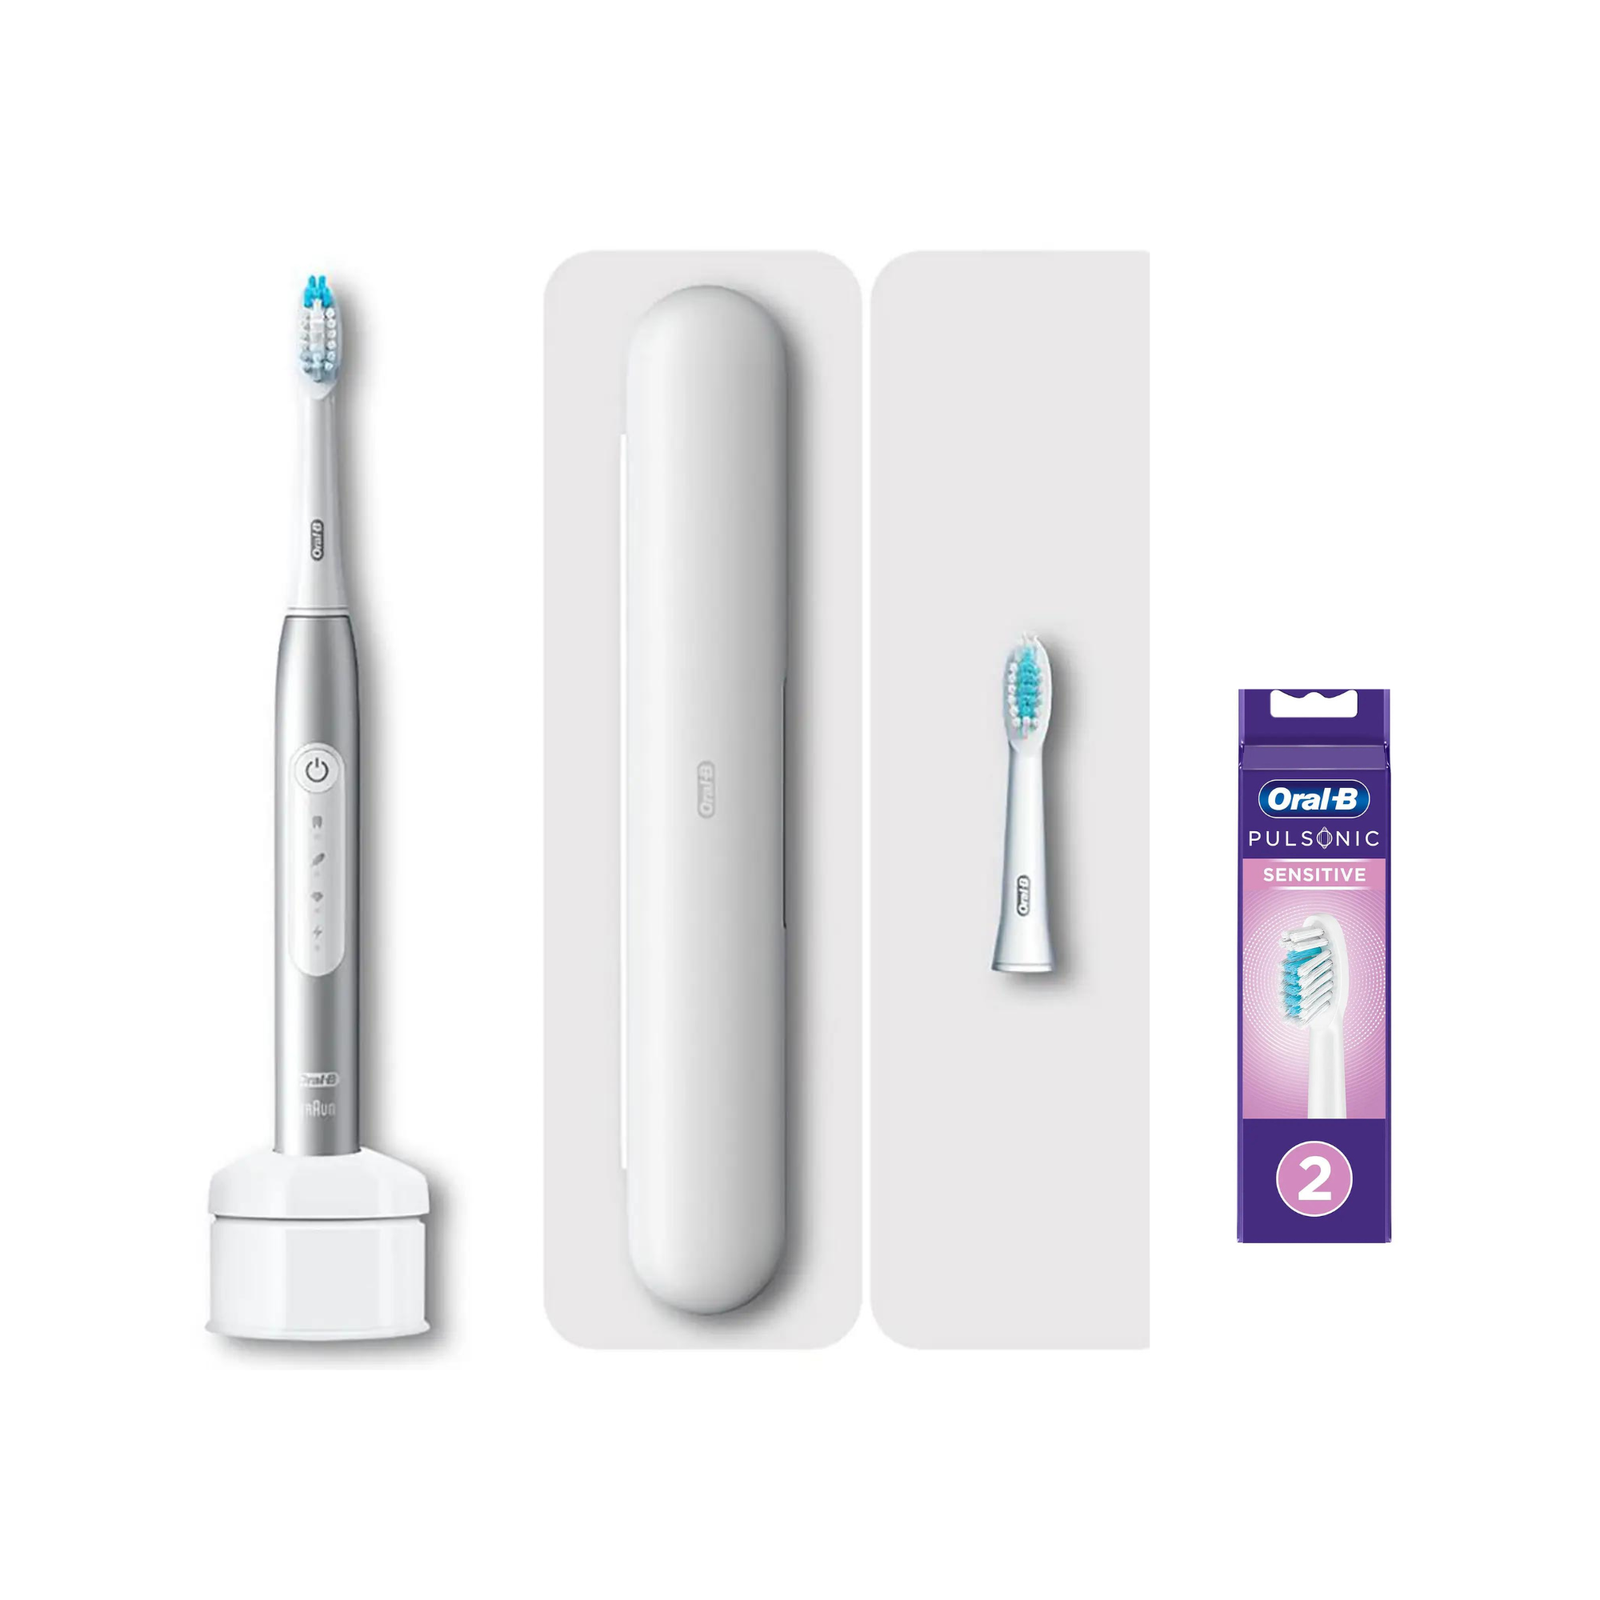 Oral B Pulsonic Slim Luxe 4500 Travel Case Refill Bundle Platin - Toothbrush with 2 Refills